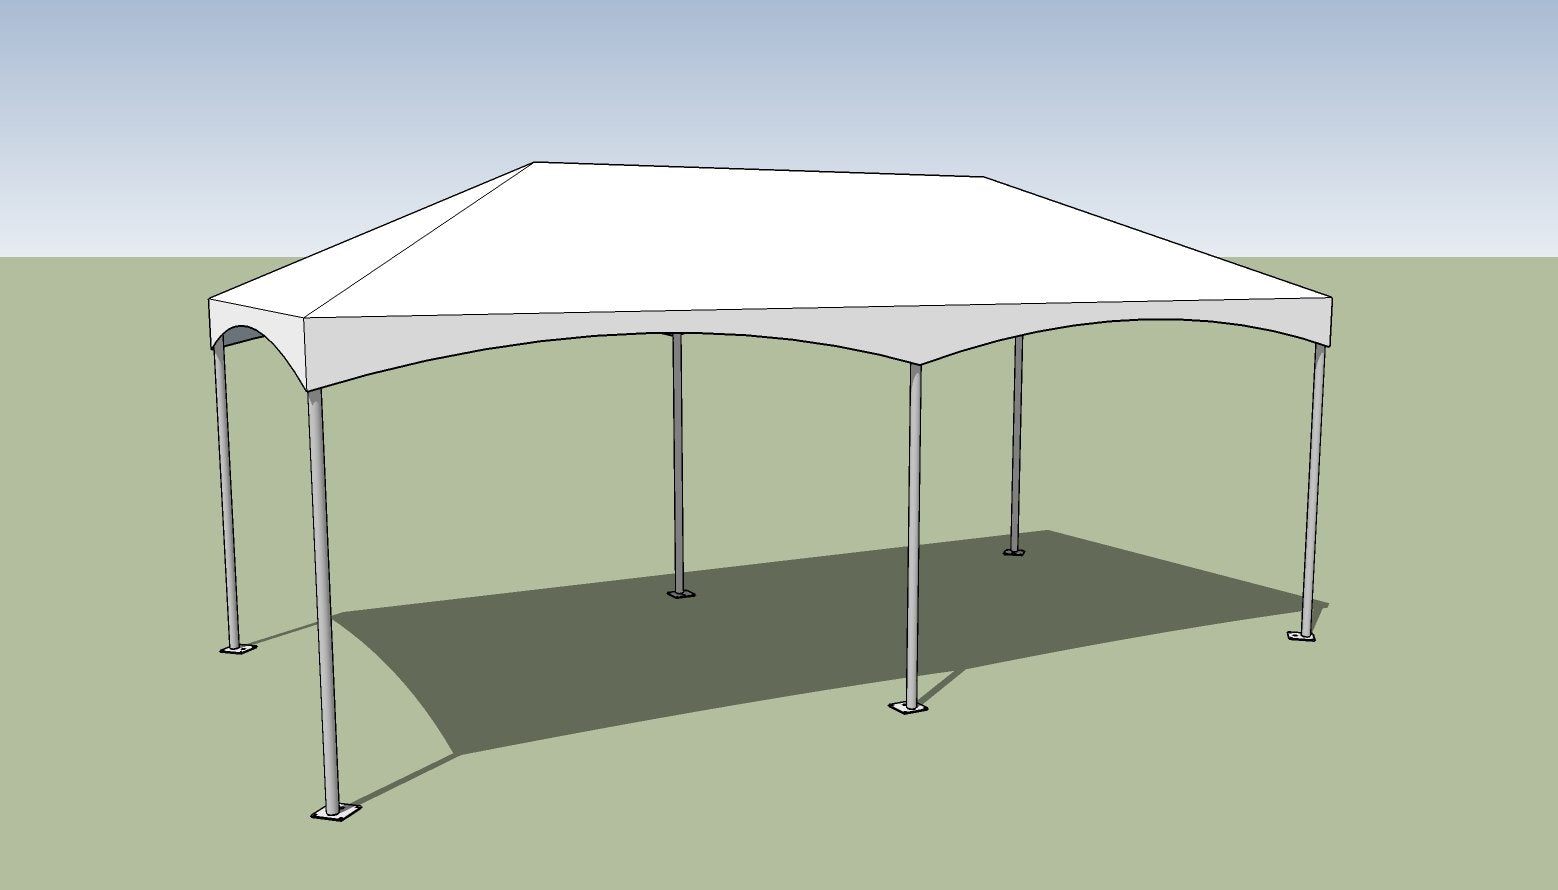 10' x 20' Frame Tent - With Premium Tension Cover – Ohenry Party Tents